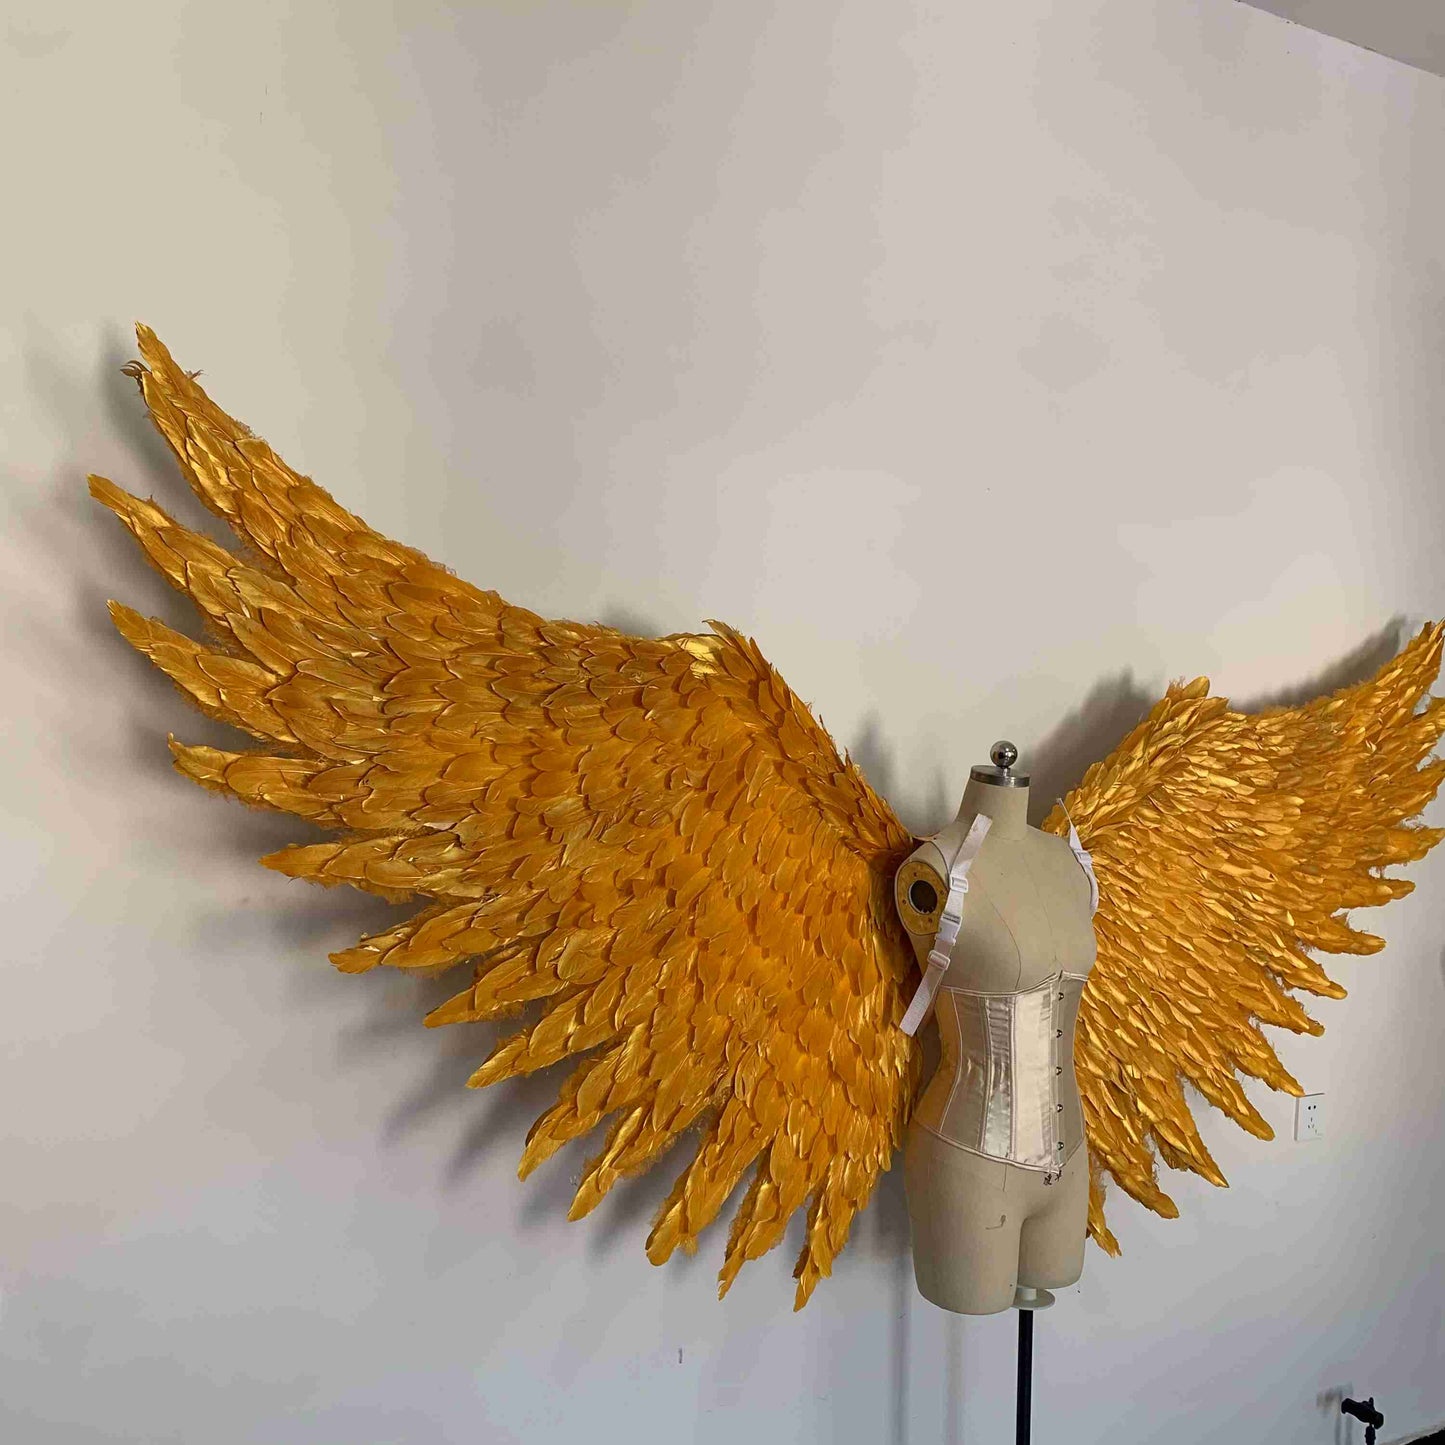 Our big golden angel wings from the right side. Made from goose feathers. Wings for angel costume. Suitable for photoshoots.